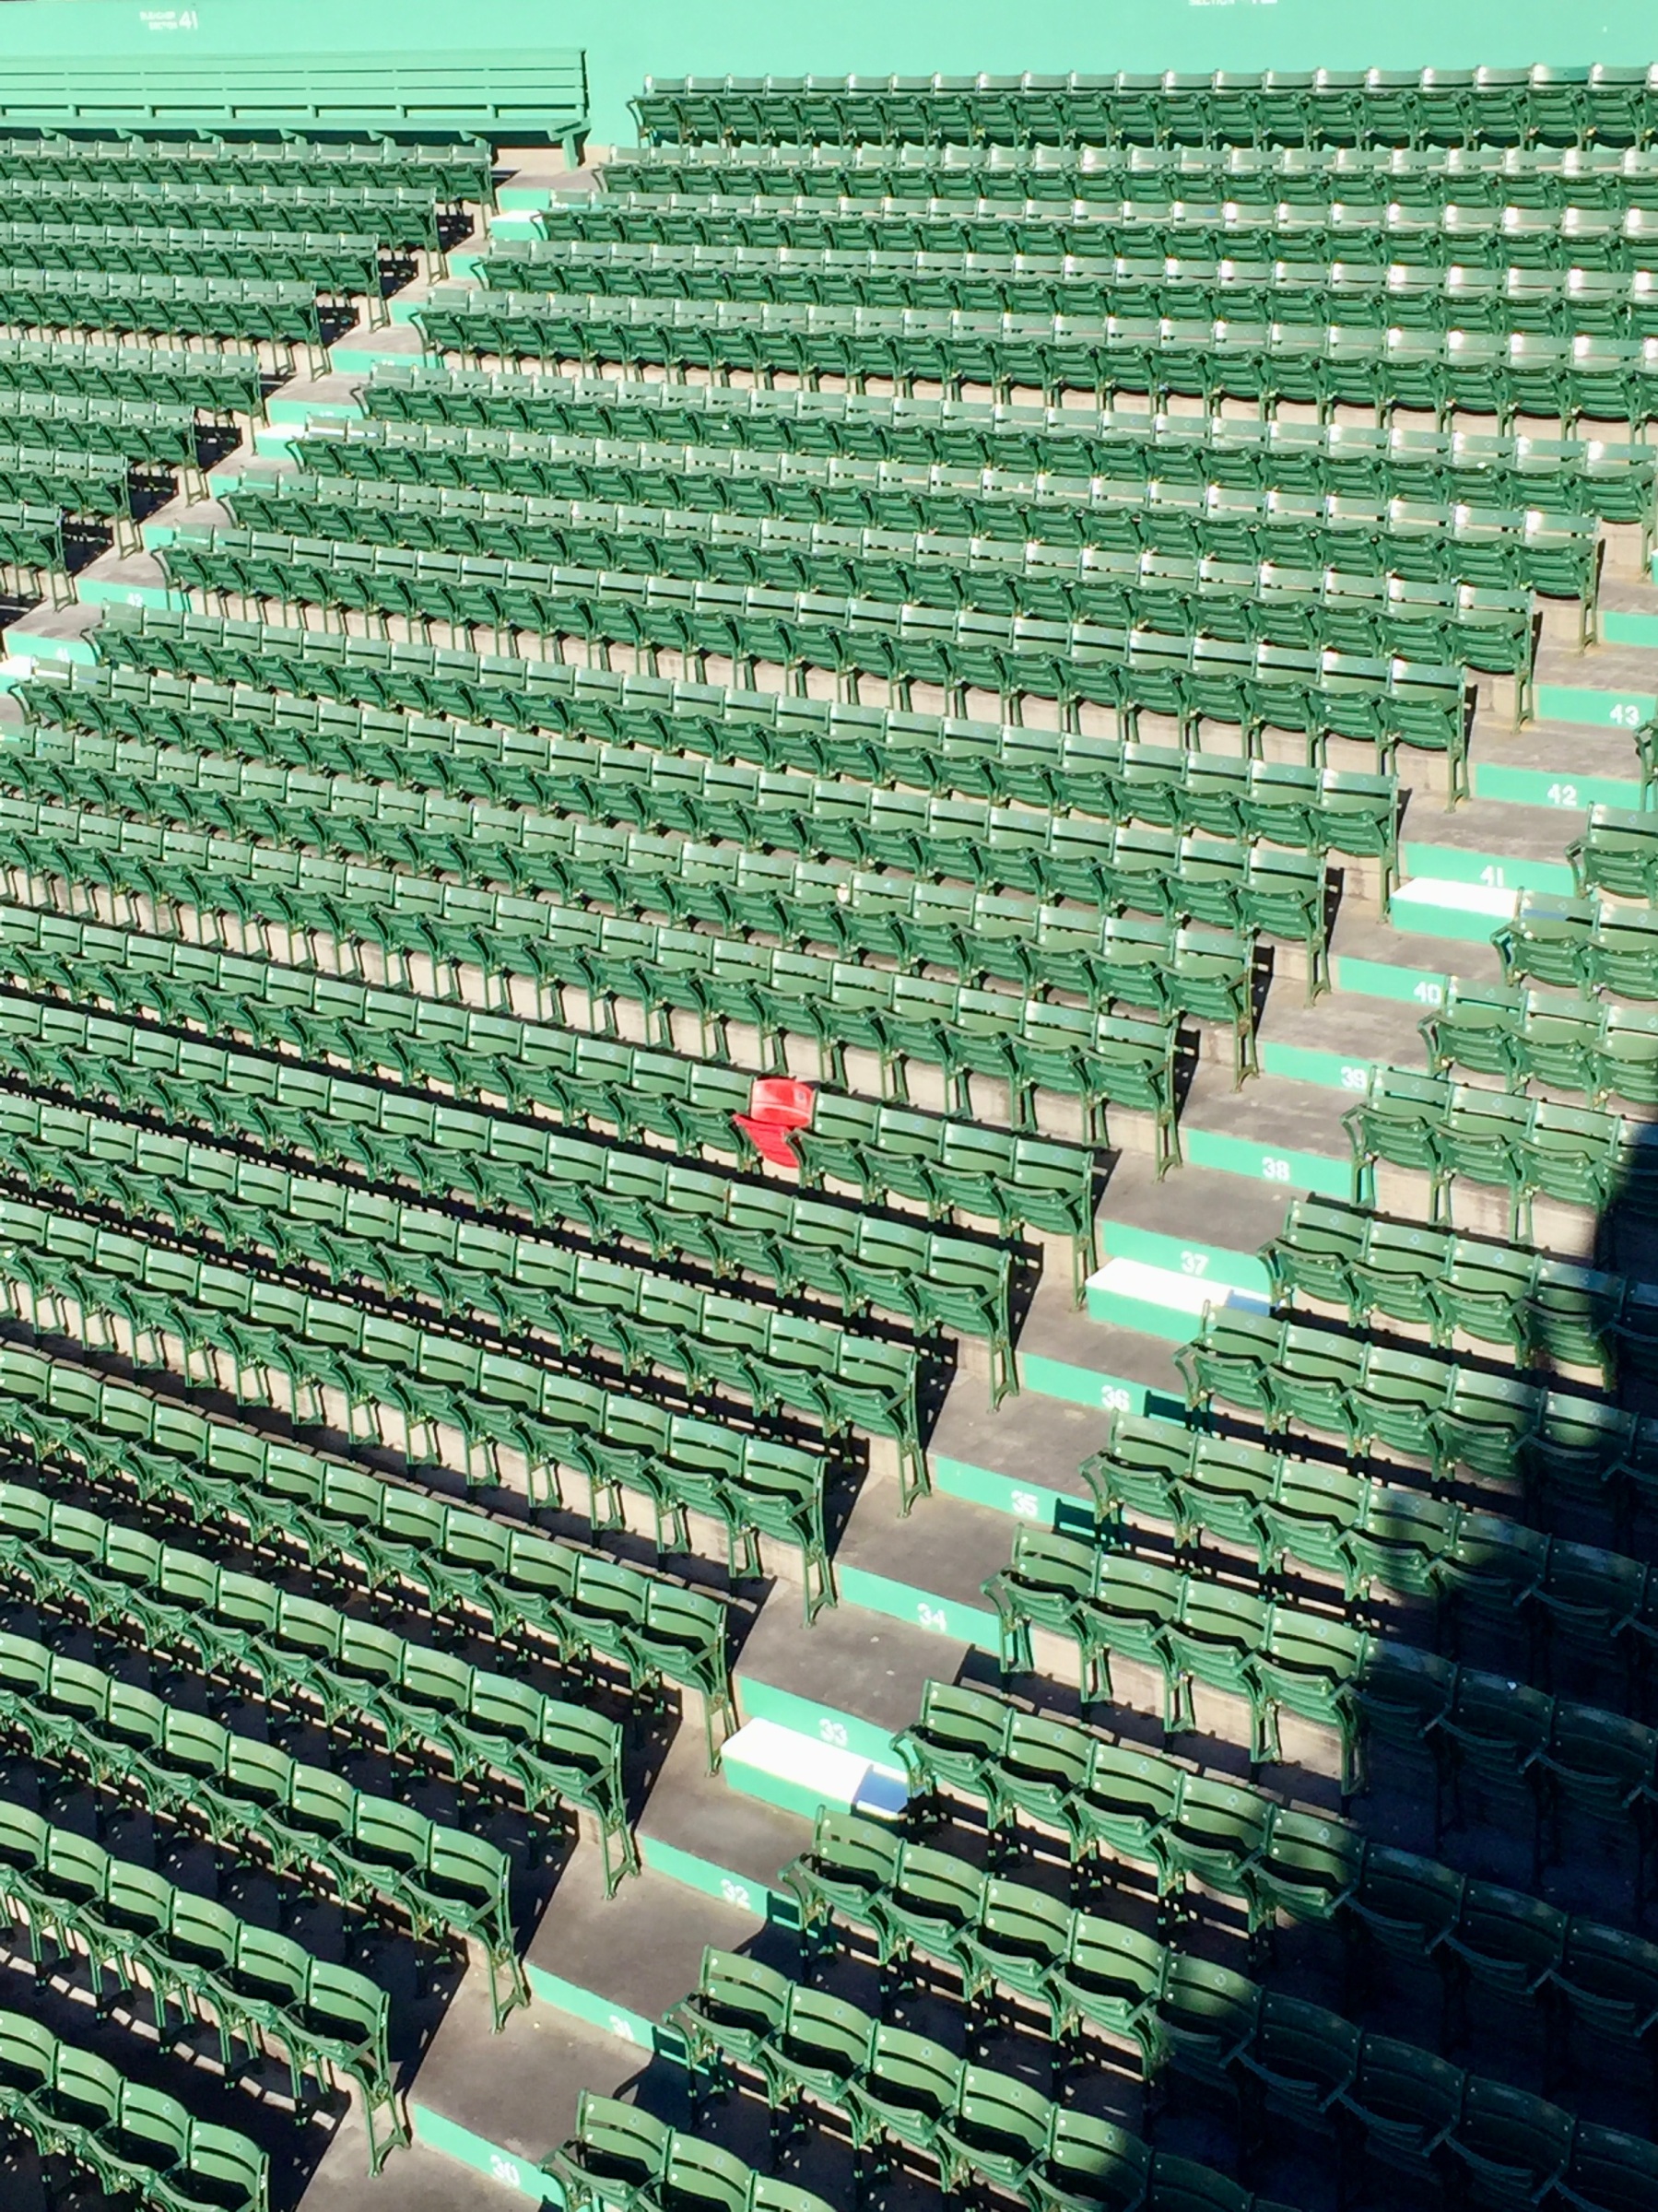 The red seat history during the Fenway Park tour